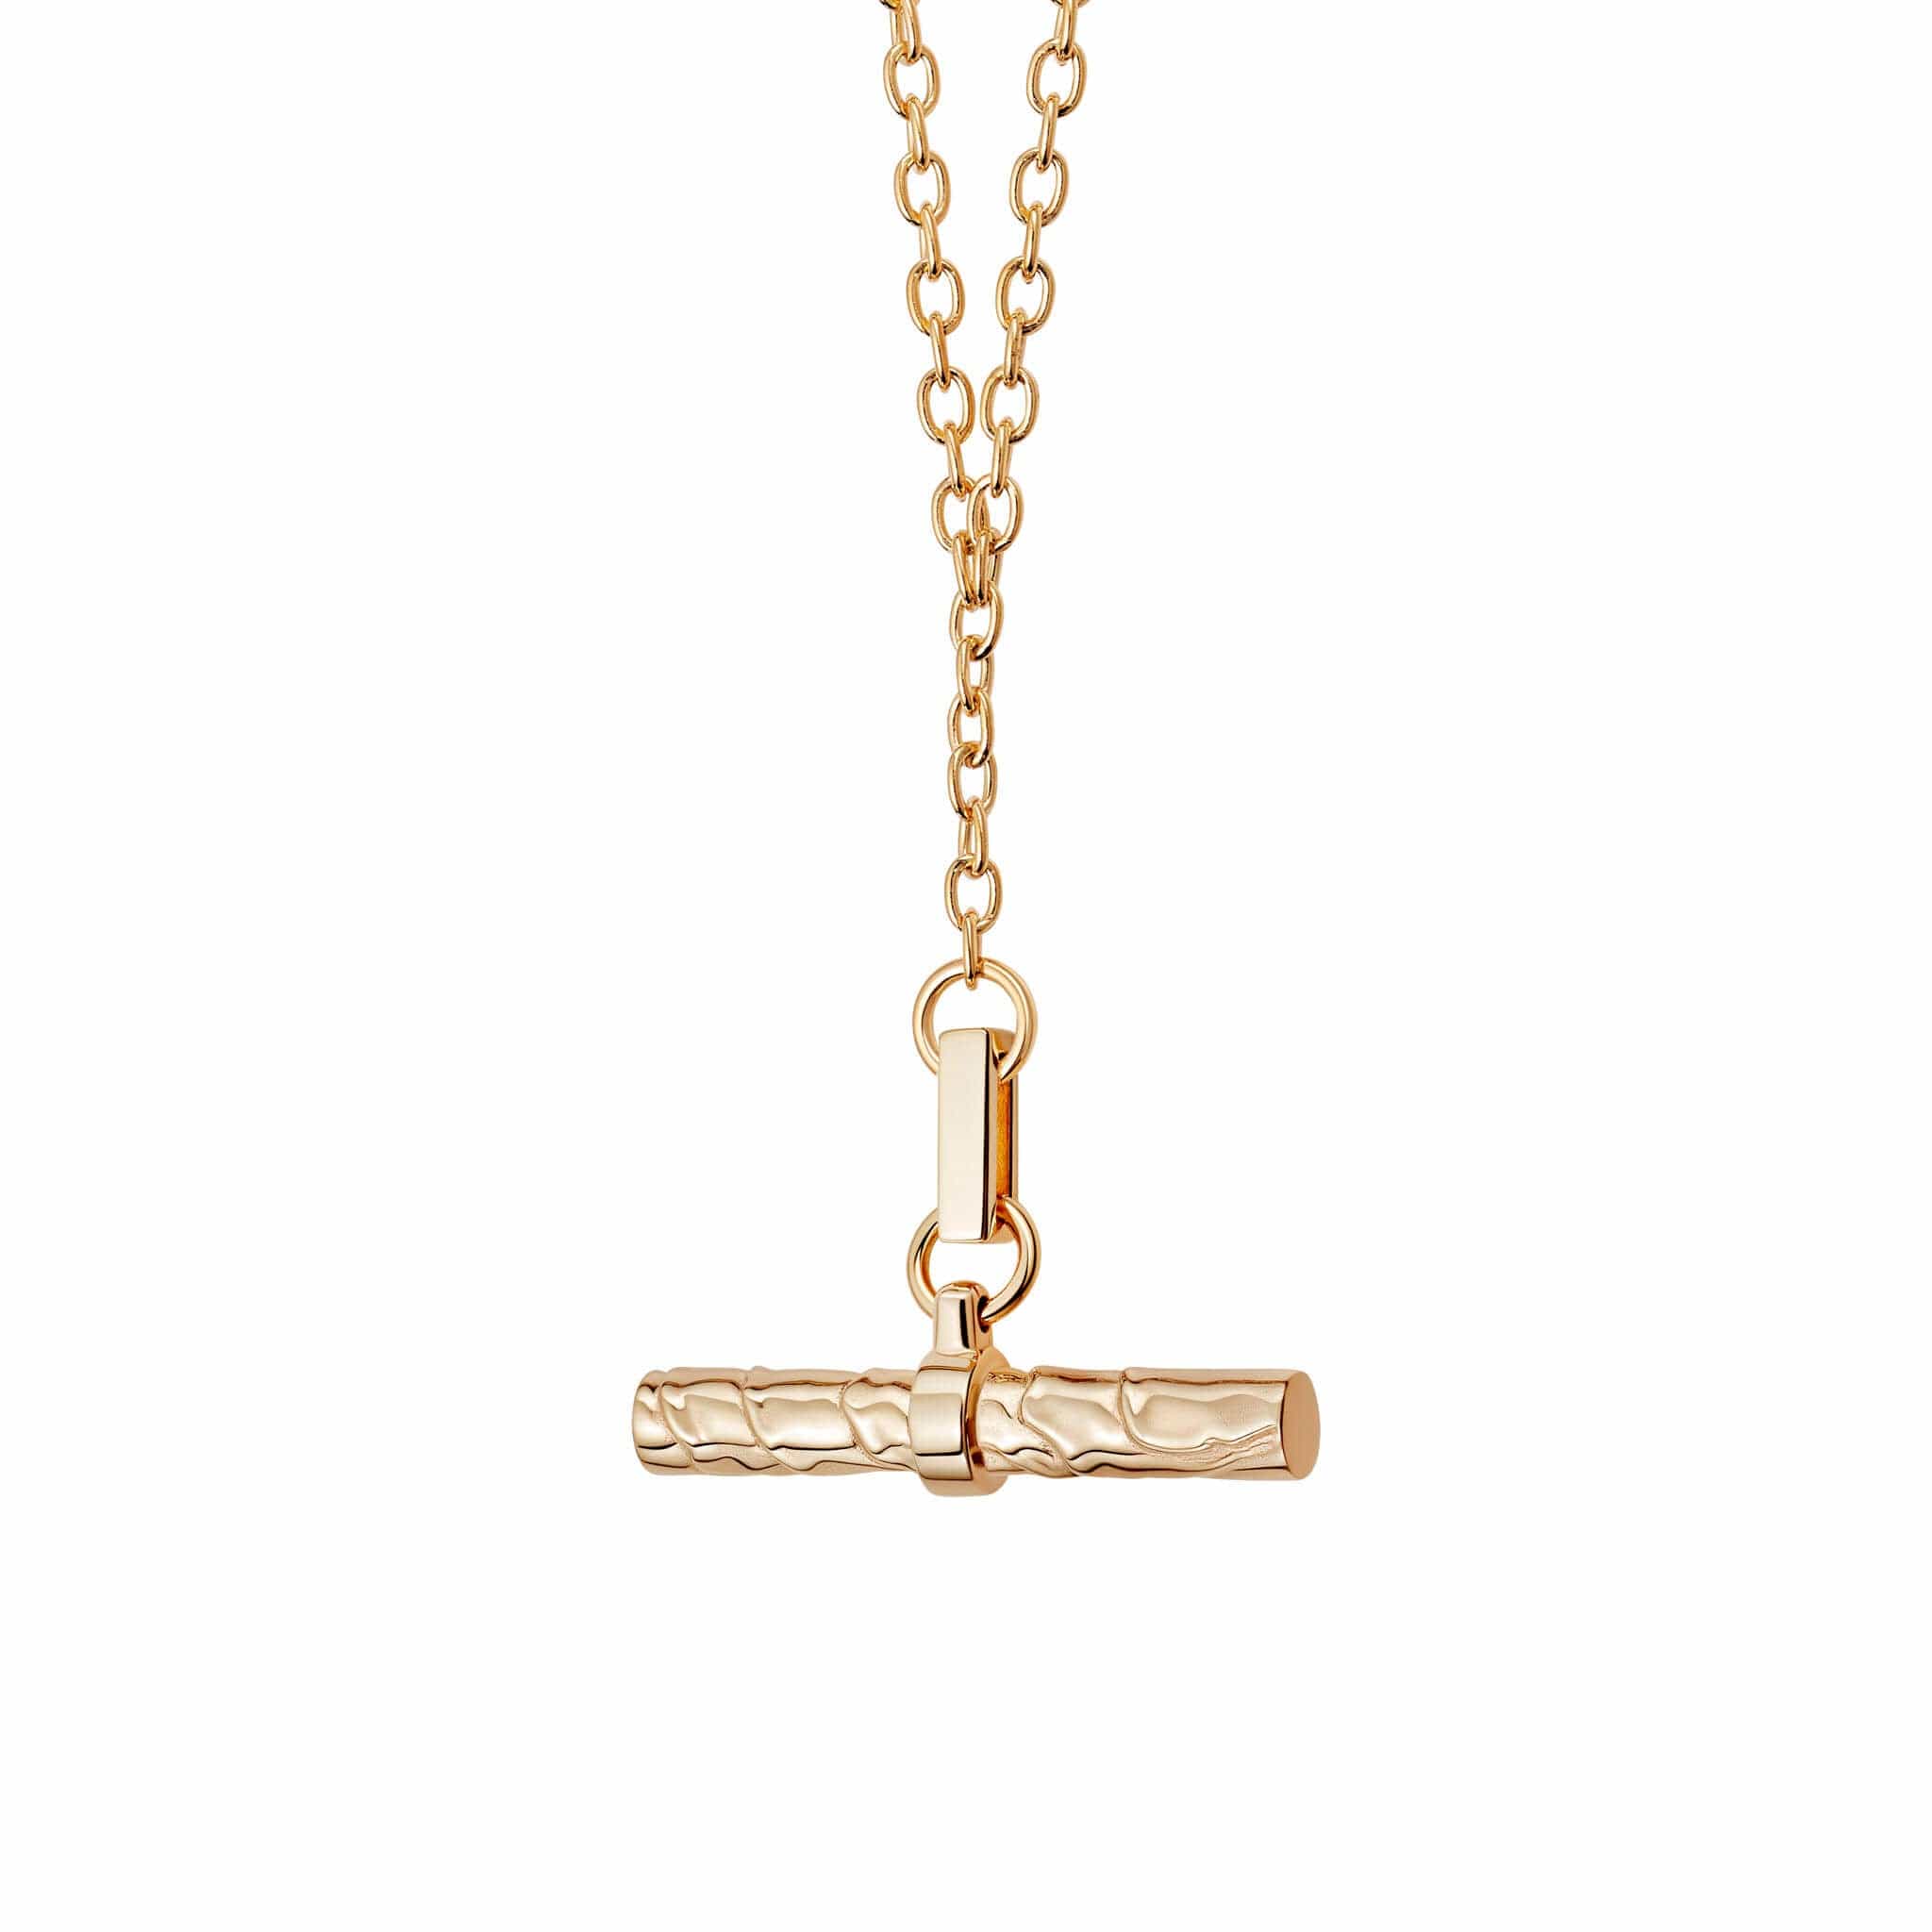 18ct Gold Plated Necklace | Jewellery | Burren | GL Ryan Jewellers |  Kilkenny Waterford